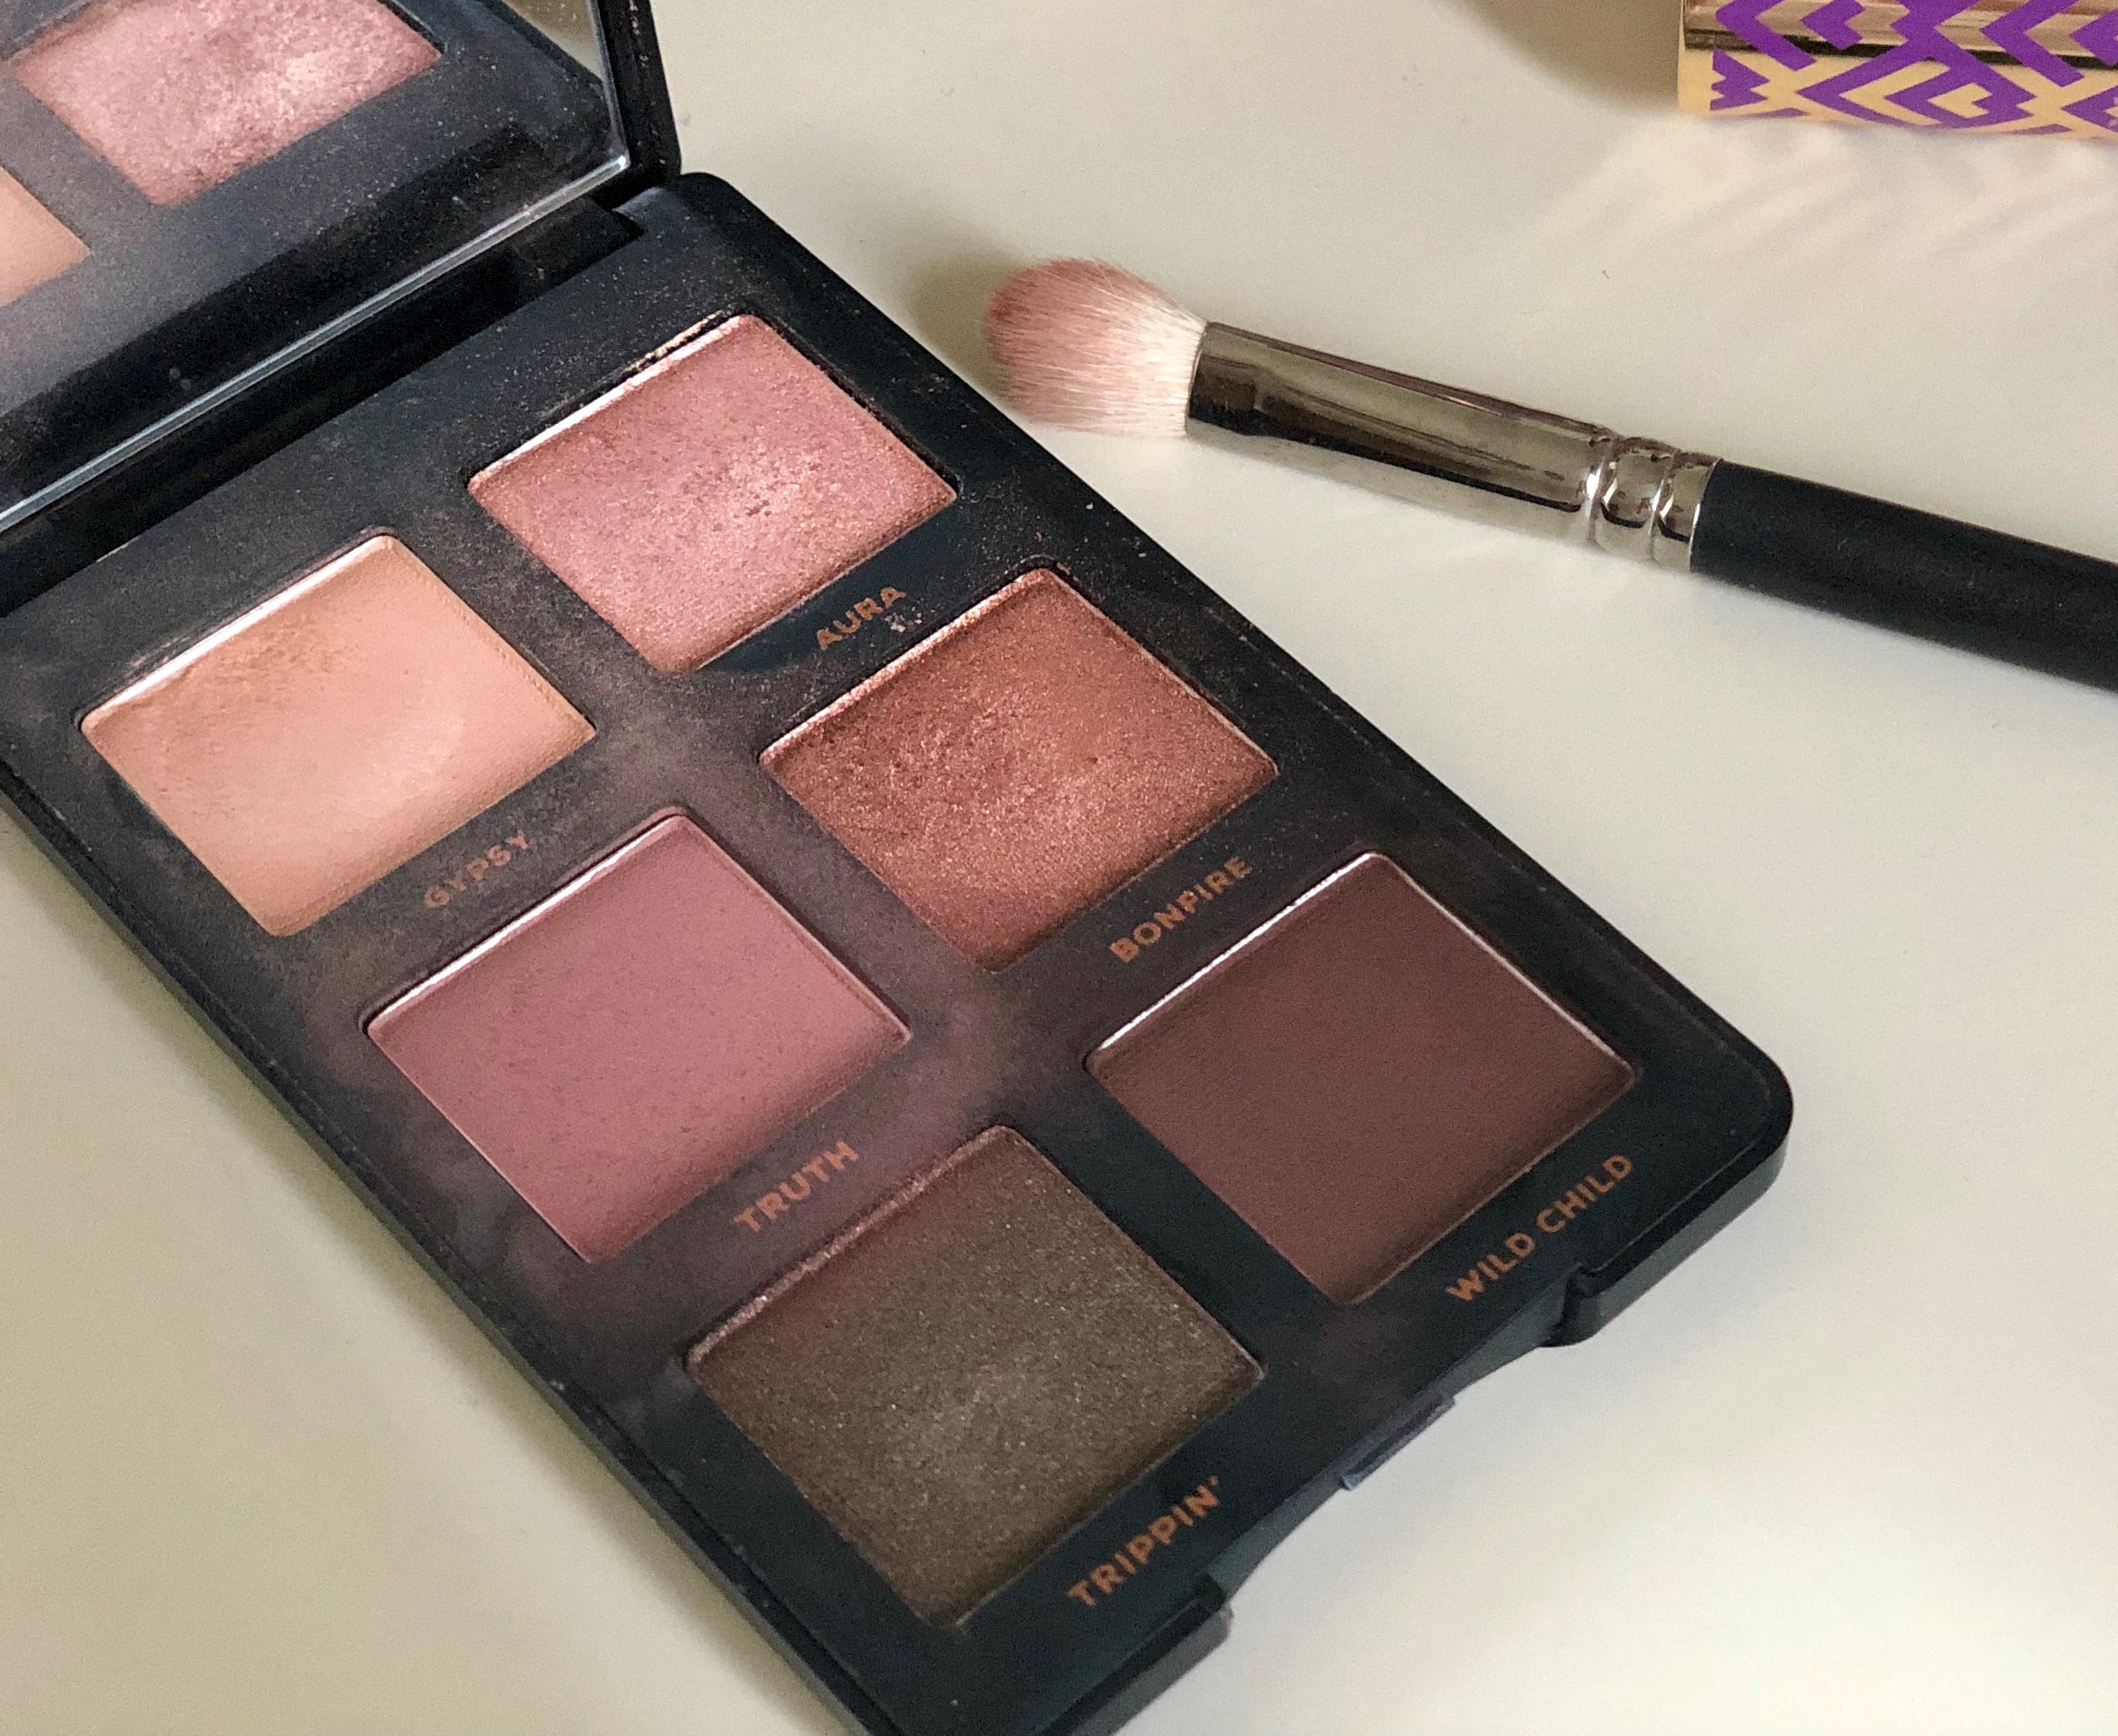 This bareMinerals Gen Nude Eyeshadow Palette in Copper has to be my most us...